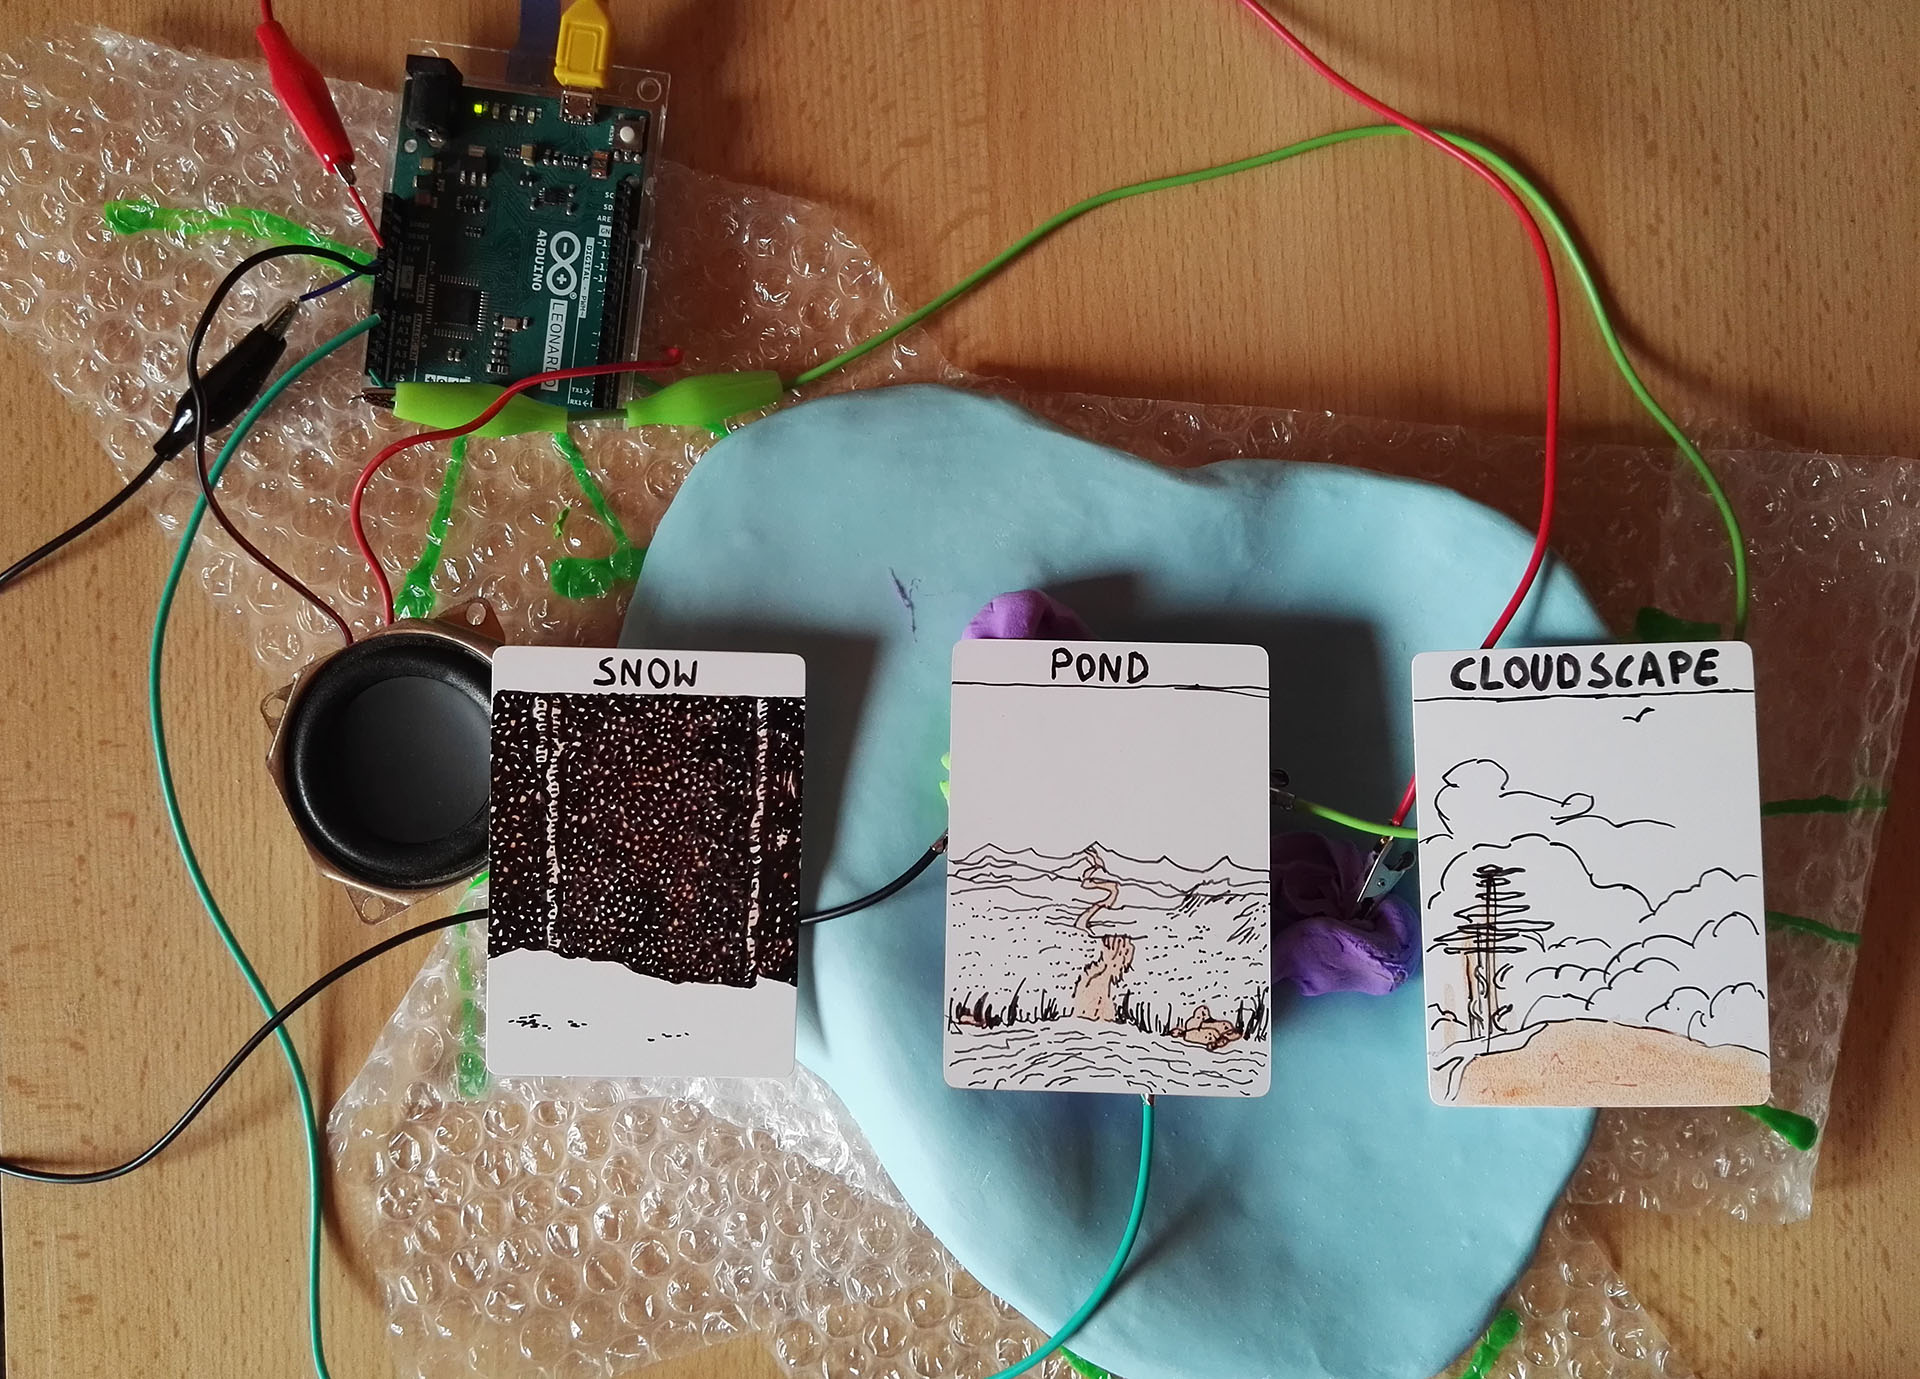 on a wooden surface there are a variety of materials. on the left side is an electronic bread board with red, green, yellow and black wires coming from it, connected to these wires are three drawn cards. on the left there is a card with the word "snow" written on it, in the middle there is "pond" and on the right side is "cloudscape". These three cards sit ontop of bubble wrap and a blue clay-like blob.